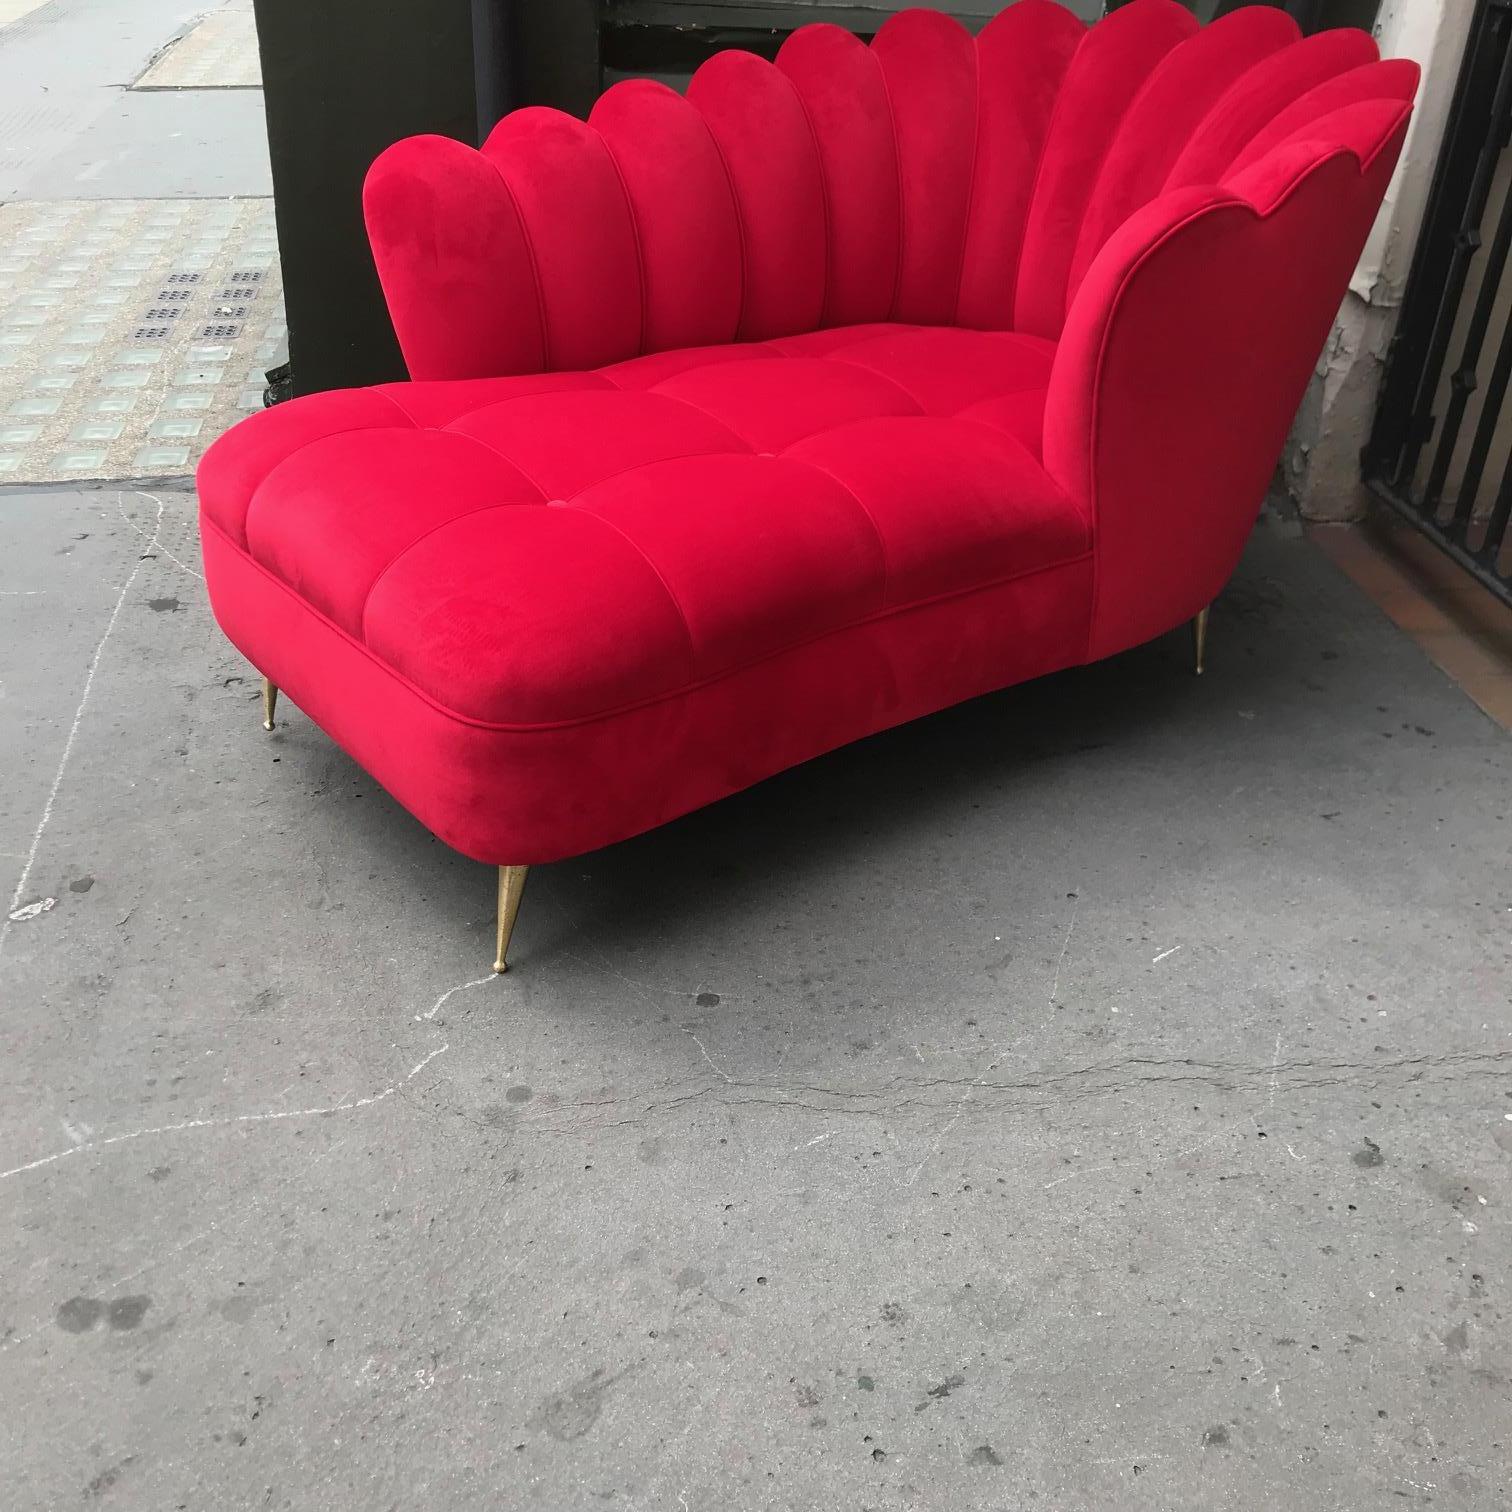 This elegant, unusual daybed/chairs lounge in the shape of the flower on the brass feet, reupholstered in red velvet, Italy, circa 1950s.